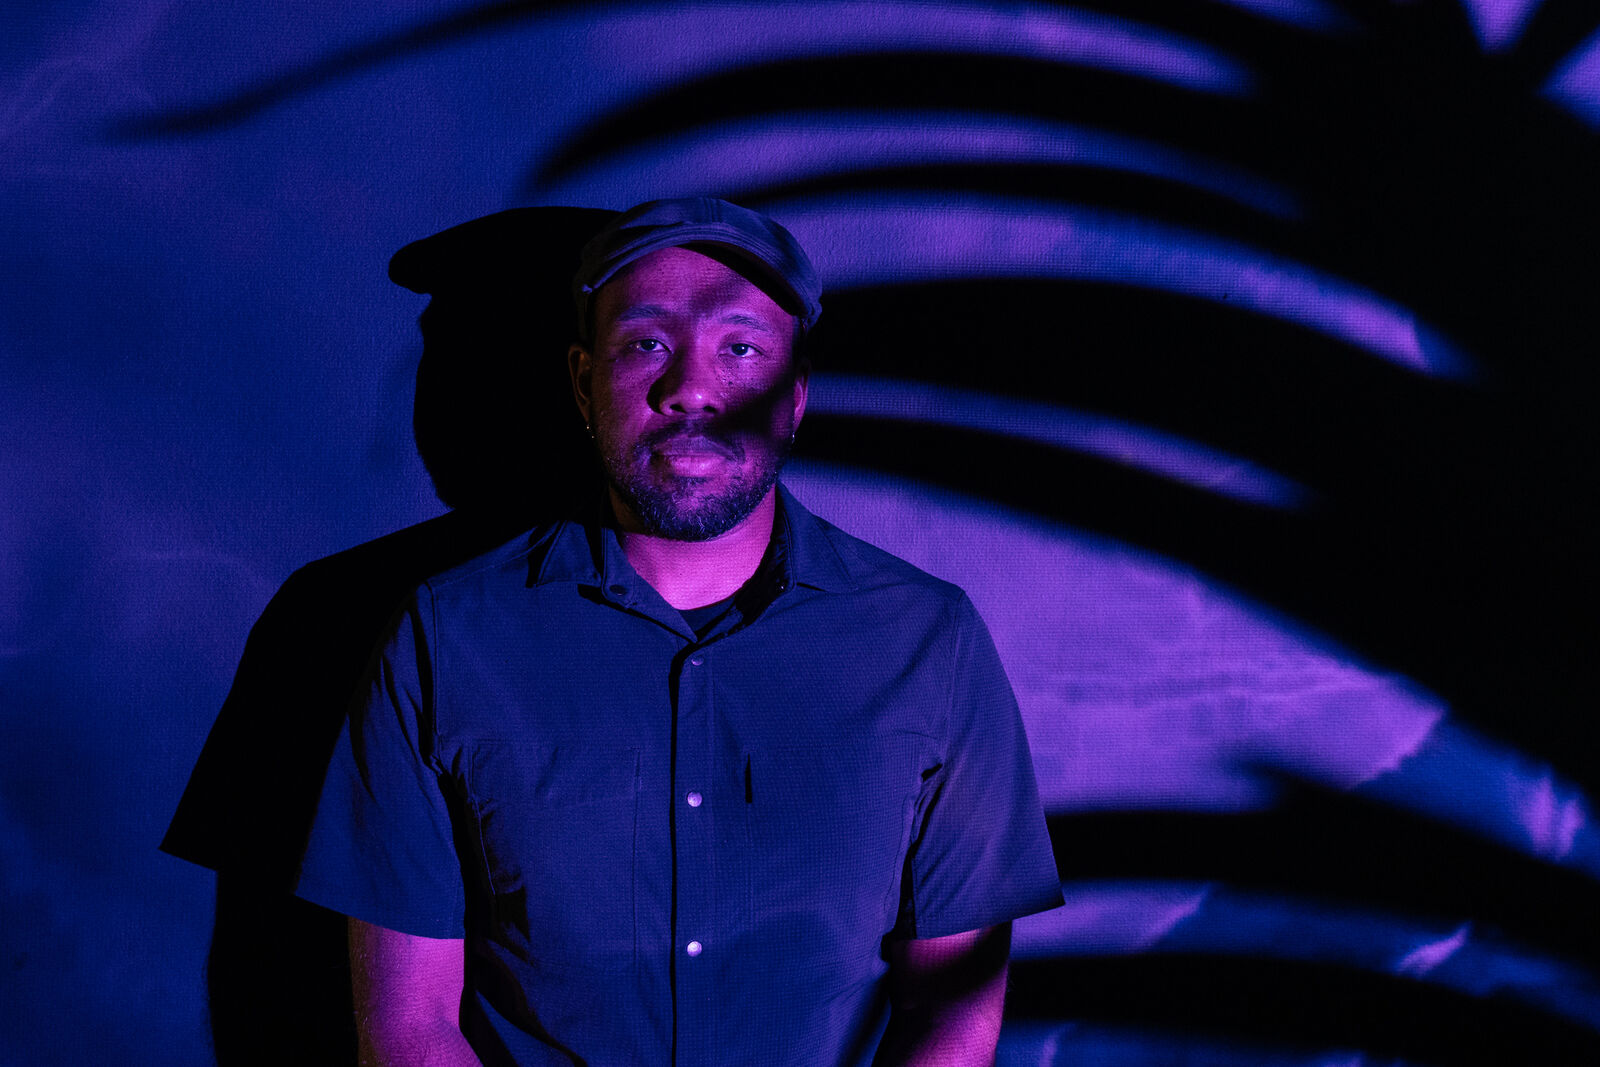 Artist Gralin Hughes, Jr. set against a wall lit by blue and purple lights. A dark shadow from my palm plant covers the right hand side of the image. Hughes wears a cap and short sleeved shirt.